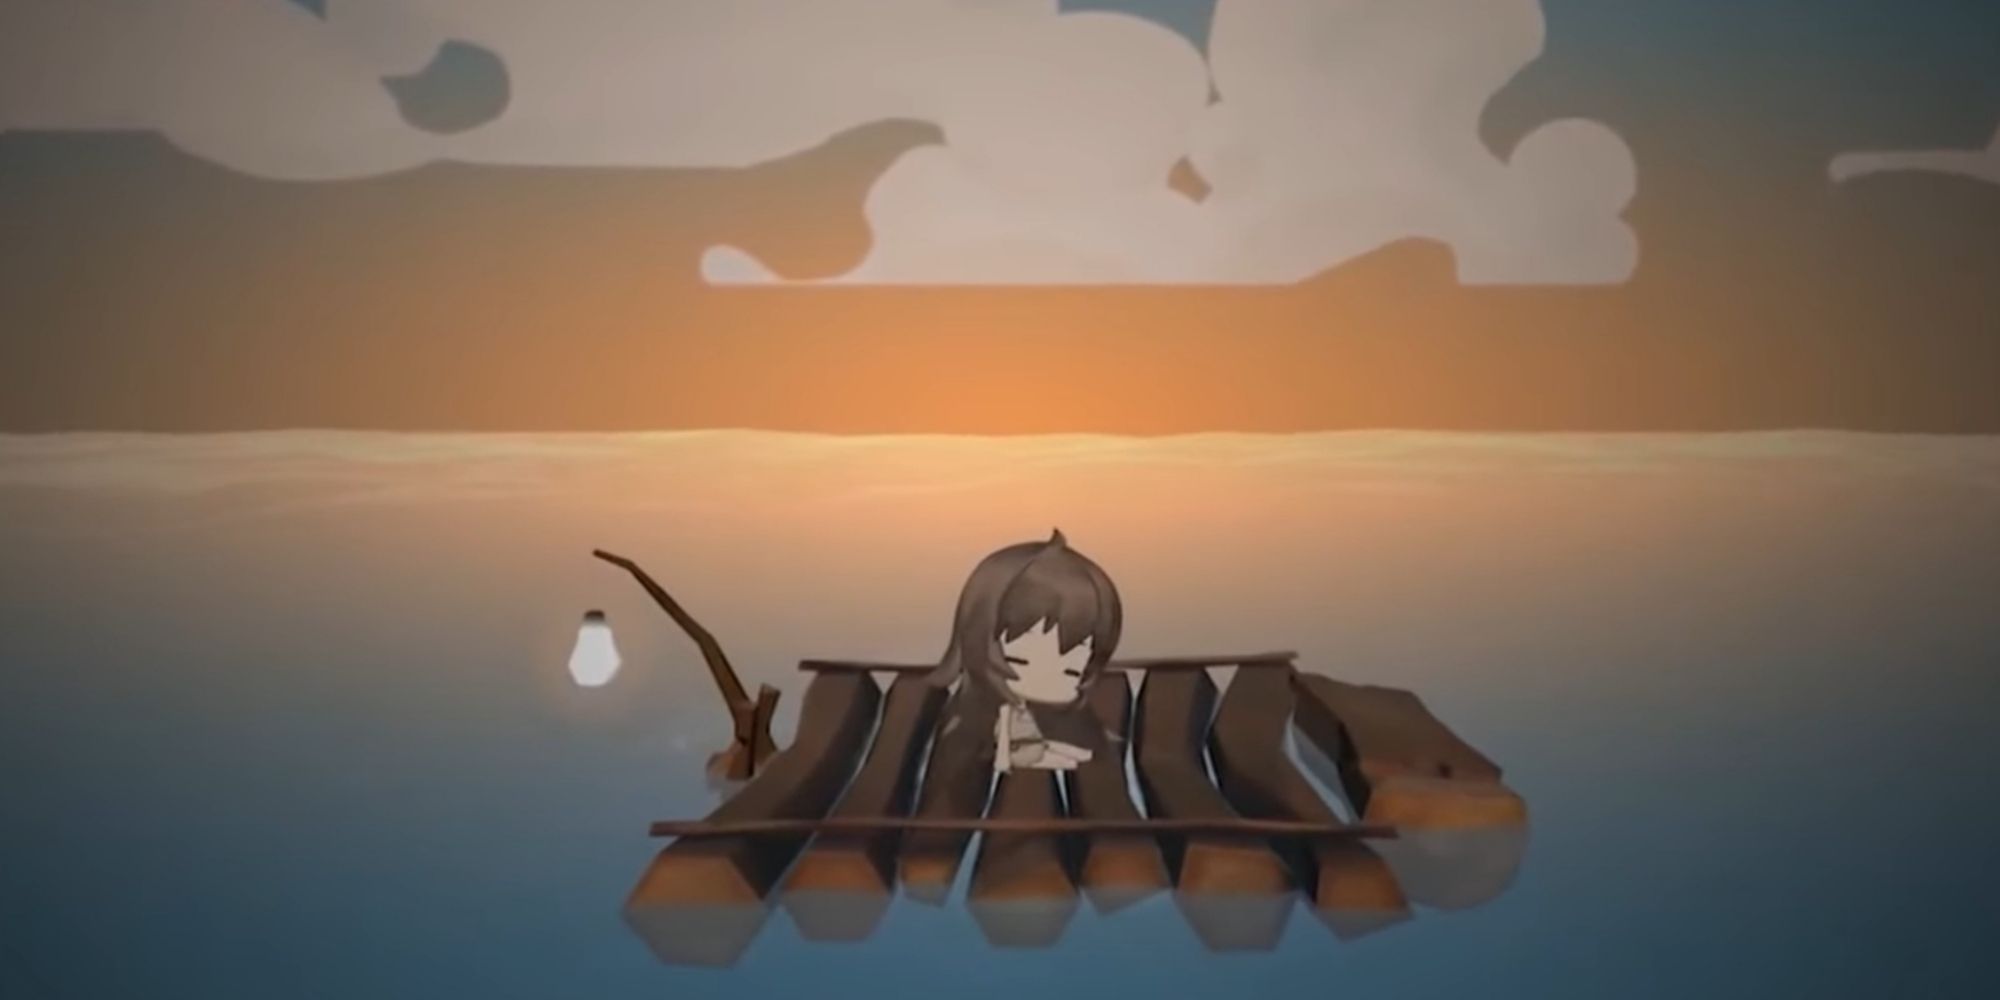 A small girl sitting down on a floating raft in A Girl Adrift.